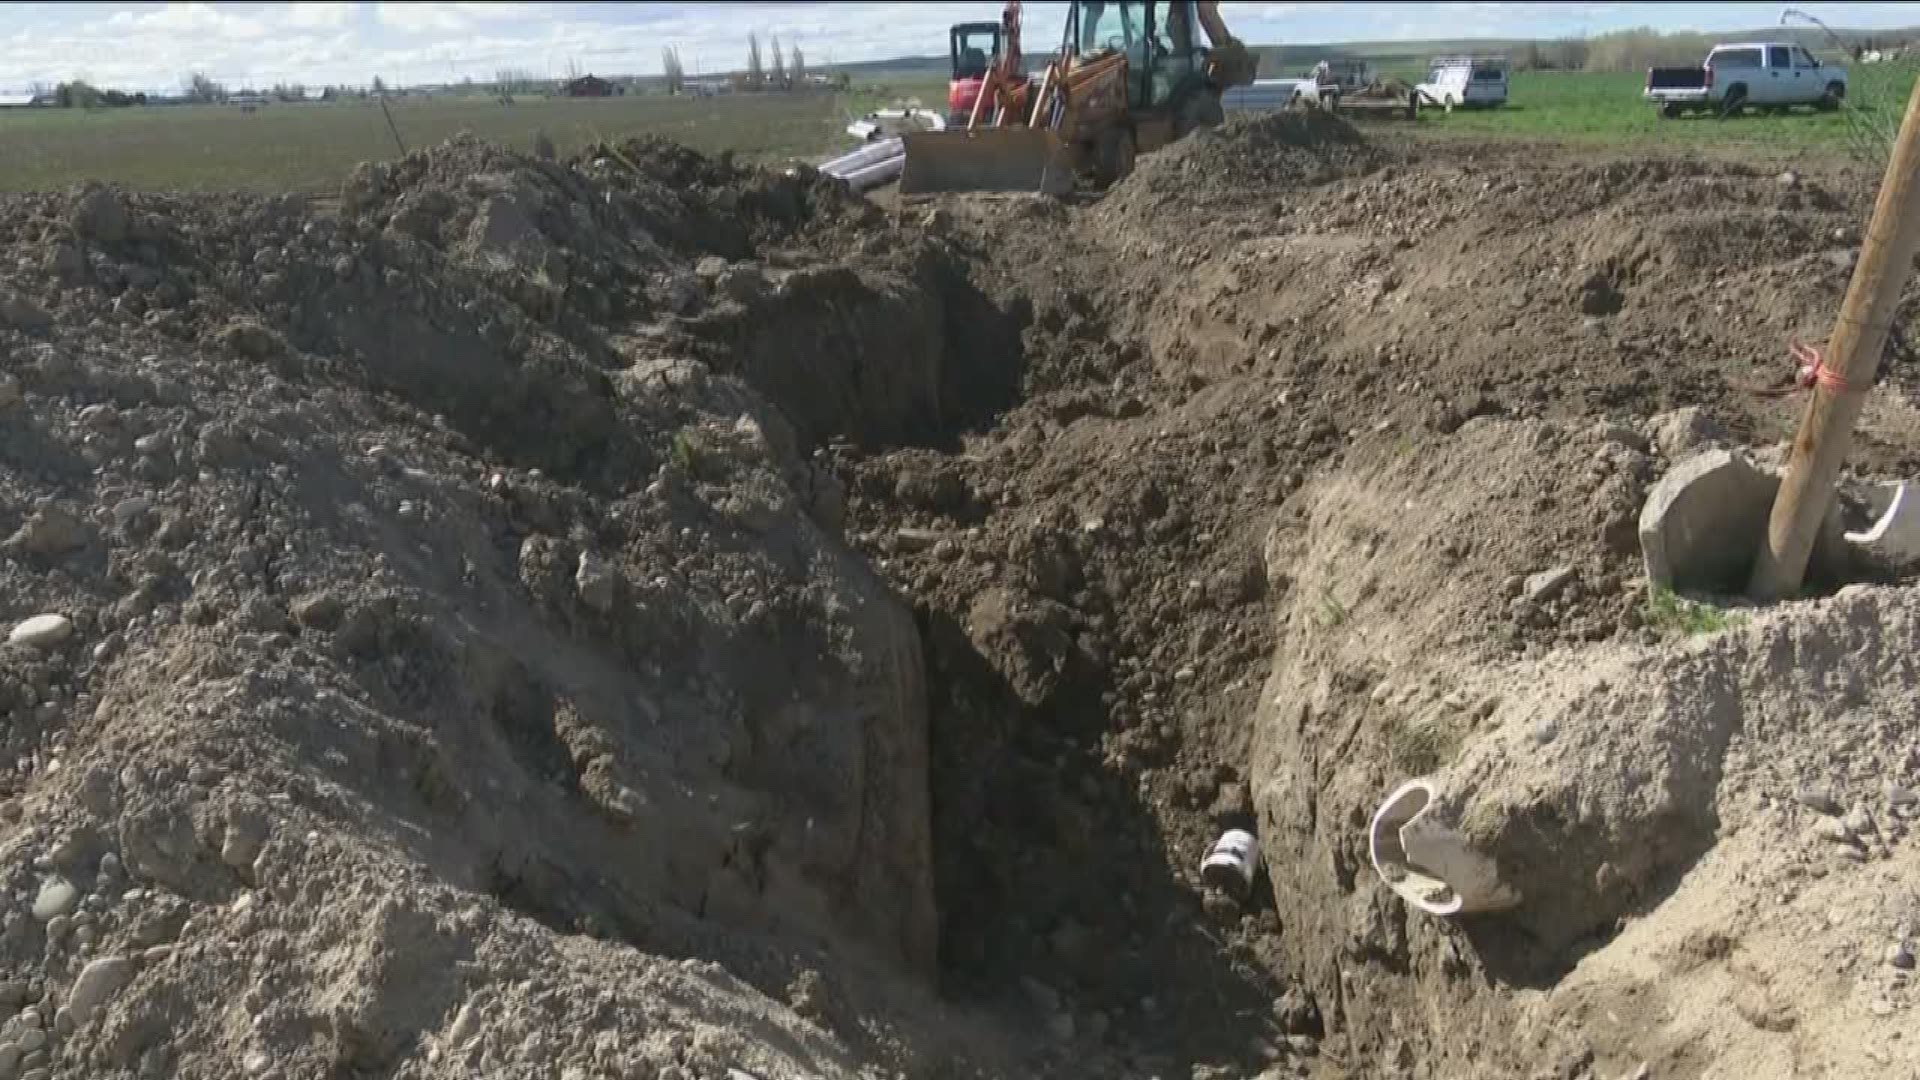 The victims were installing irrigation pipes for a private company when the ditch collapsed.